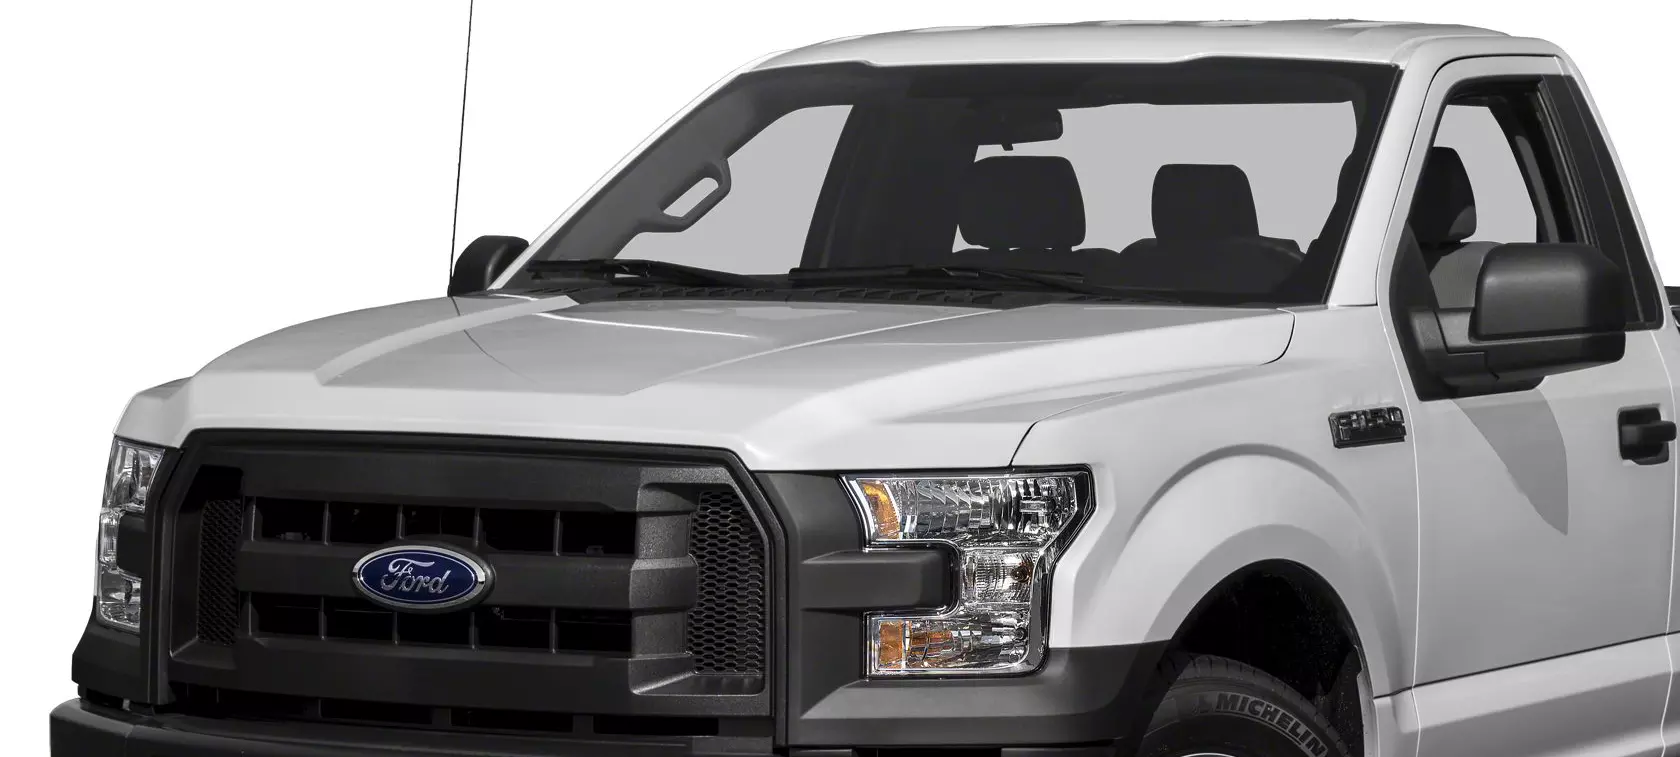 2016 Ford F-150 LPG/CNG ready to roll